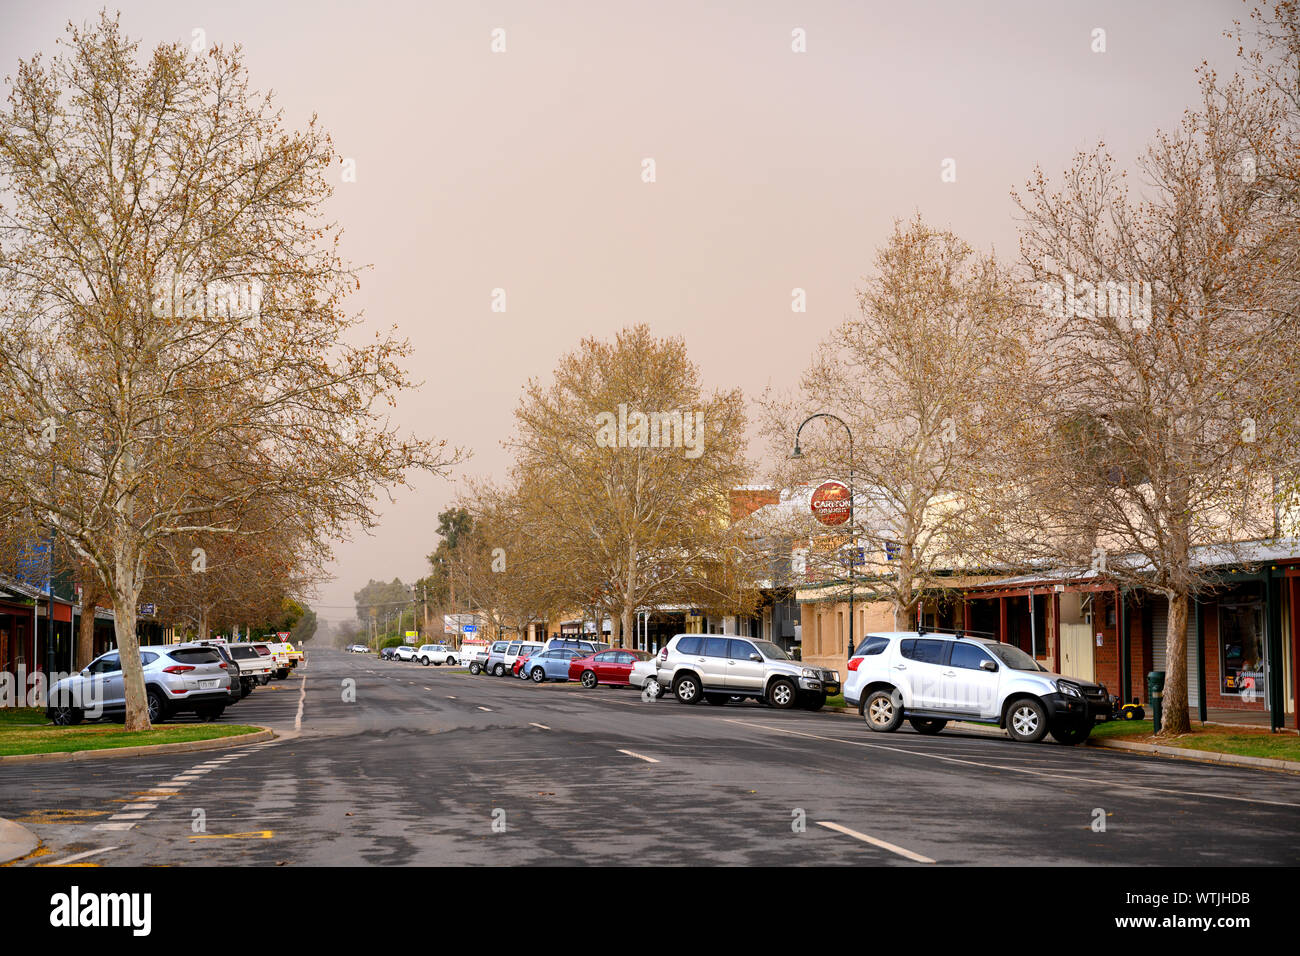 After a shower of rain, Wentworth is about to experience another dust storm as the drought continues. September 2019. Stock Photo